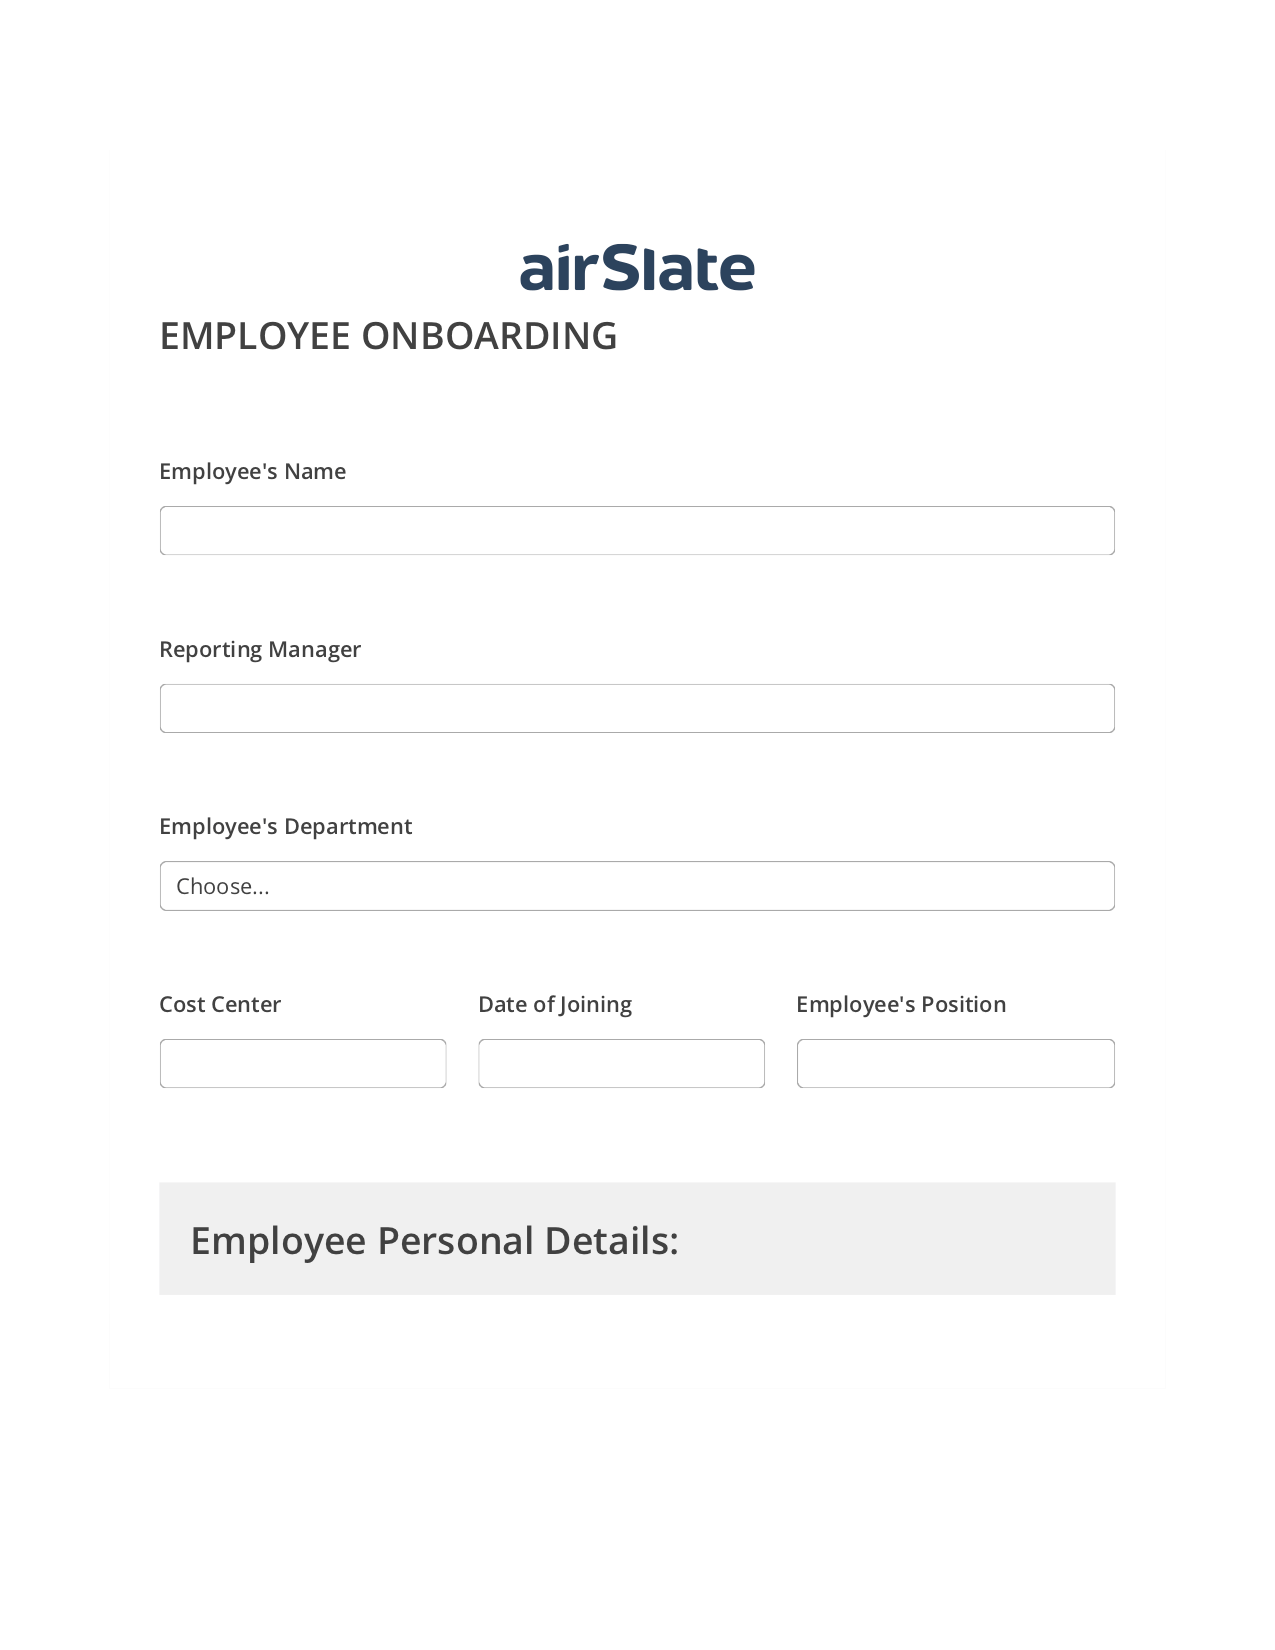 Employee Onboarding Workflow Prefill from NetSuite records, Send a Slate to MS Dynamics 365 Contact Bot, Archive to OneDrive Bot